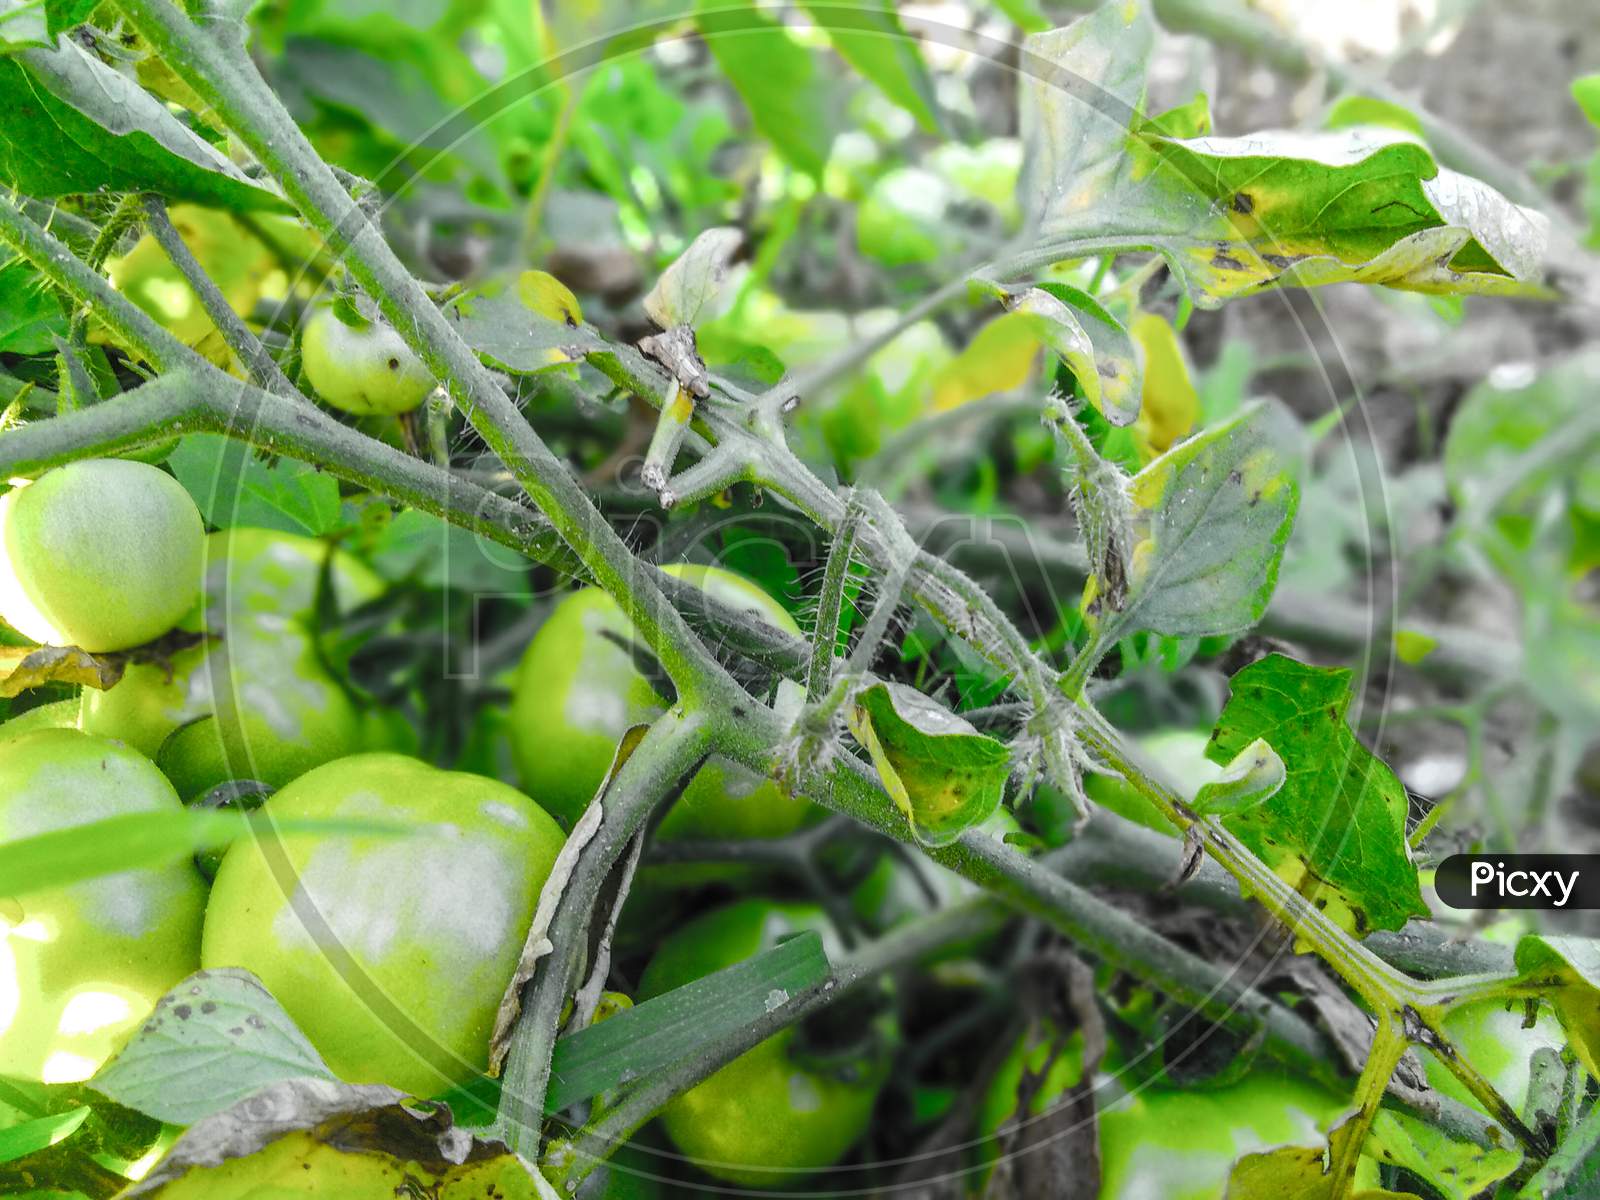 Green tomatoes are growing